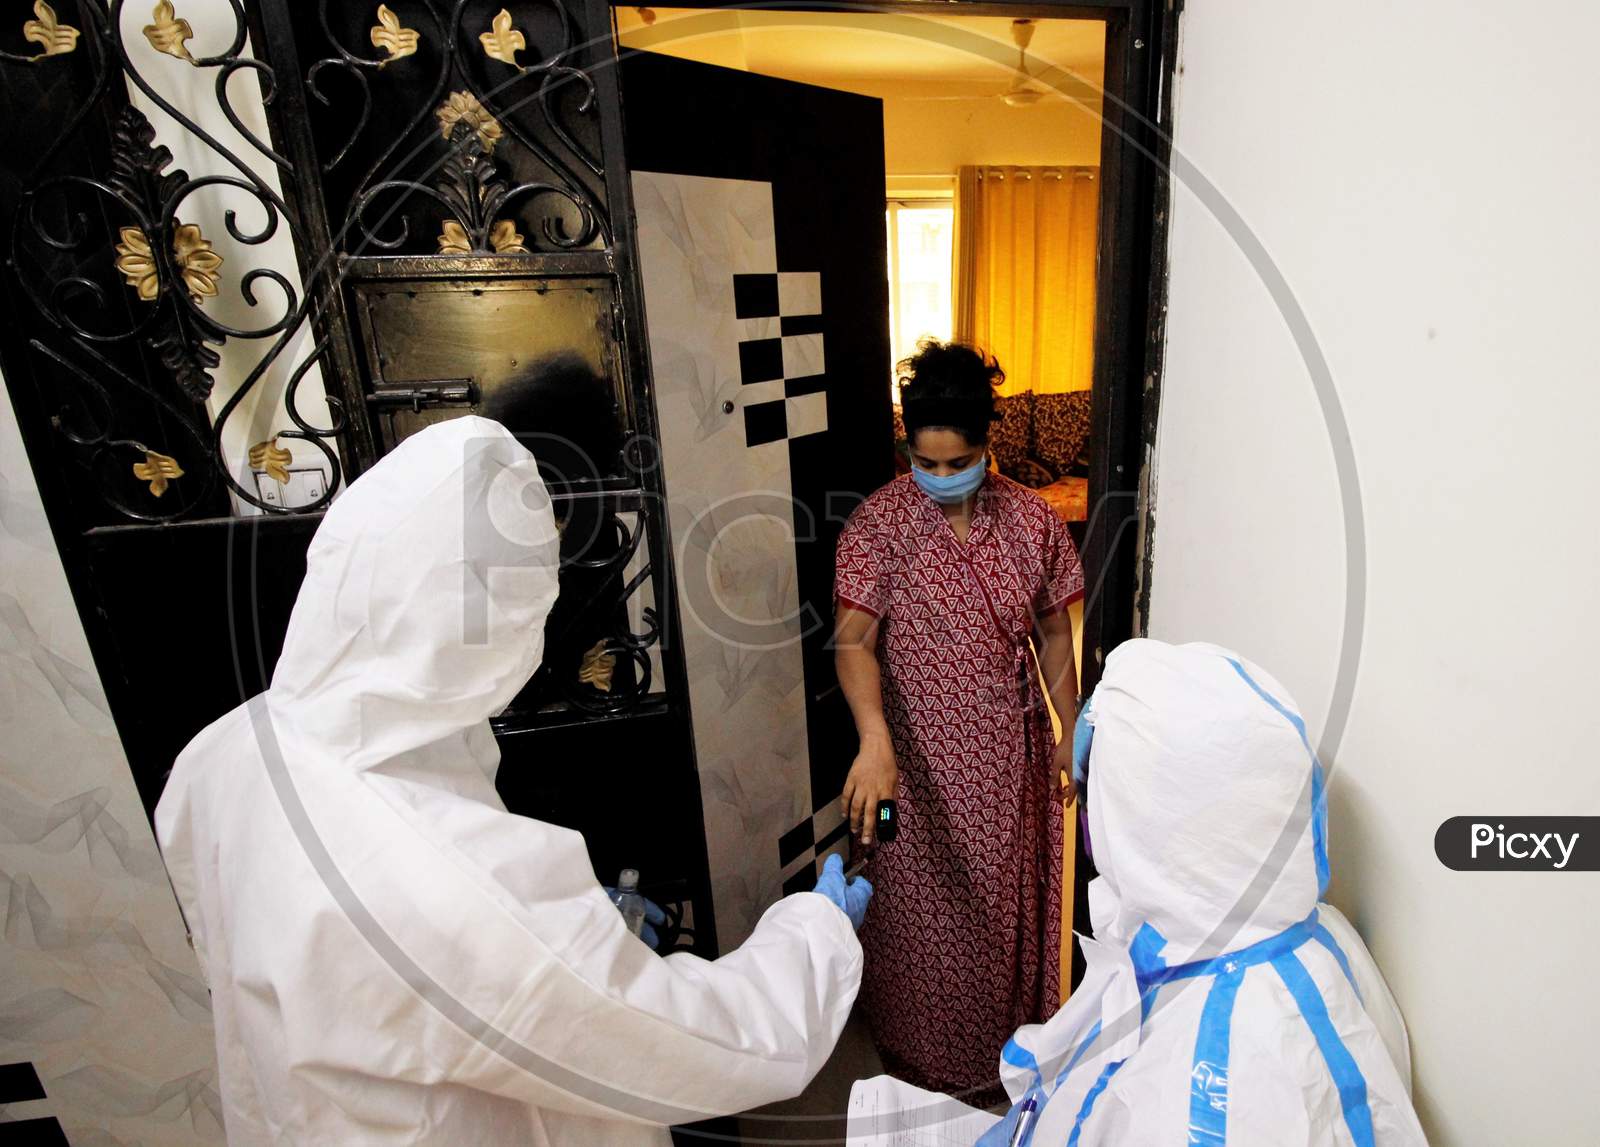 Healthcare workers wearing personal protective equipment (PPE) measure the pulse of a resident during a check-up campaign for the coronavirus disease (COVID-19), in Mumbai, India on July 26, 2020.